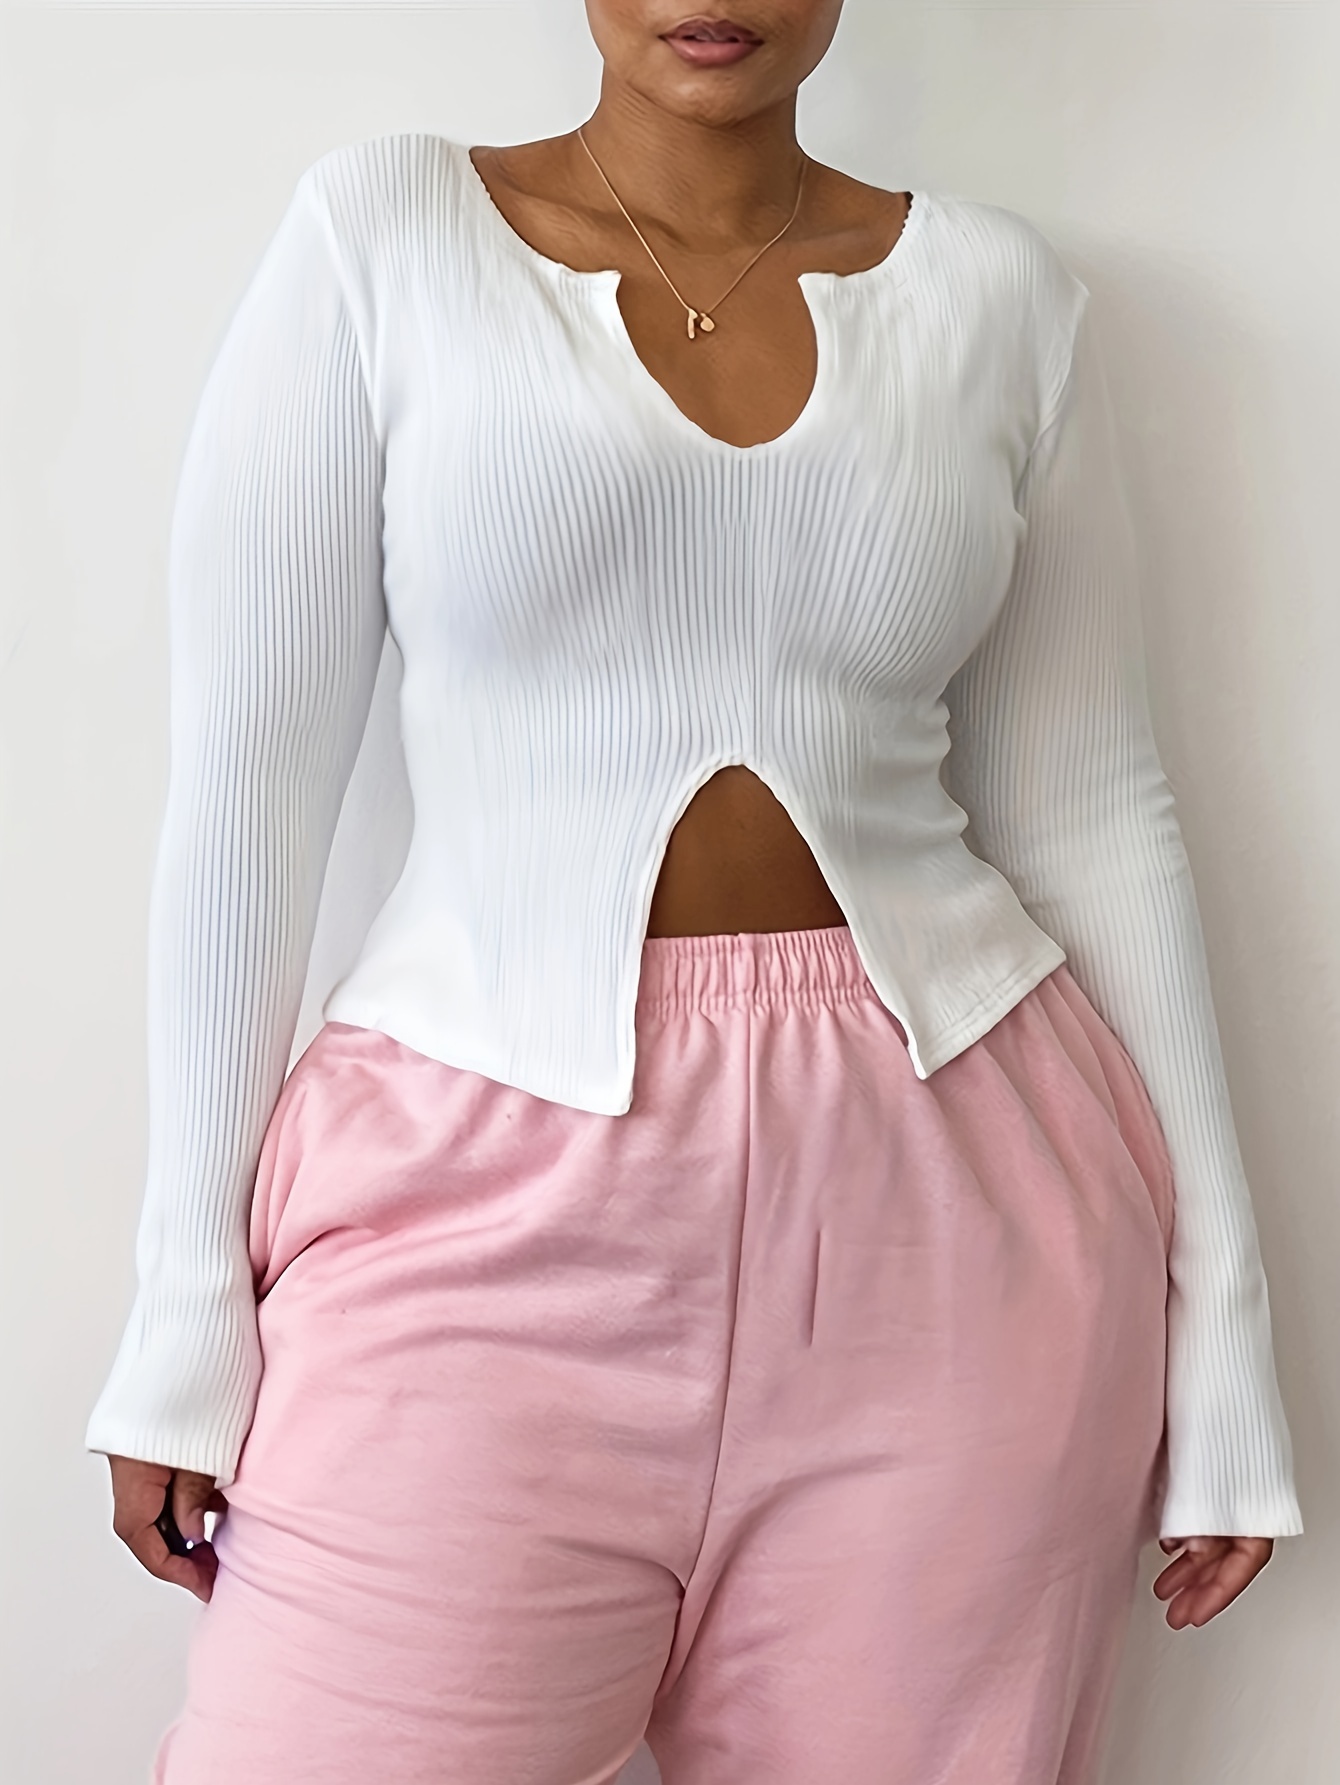 Plus Size One Shoulder Ripped Long Sleeve T-shirt, Women's Plus Slight  Stretch Solid Sexy Tee